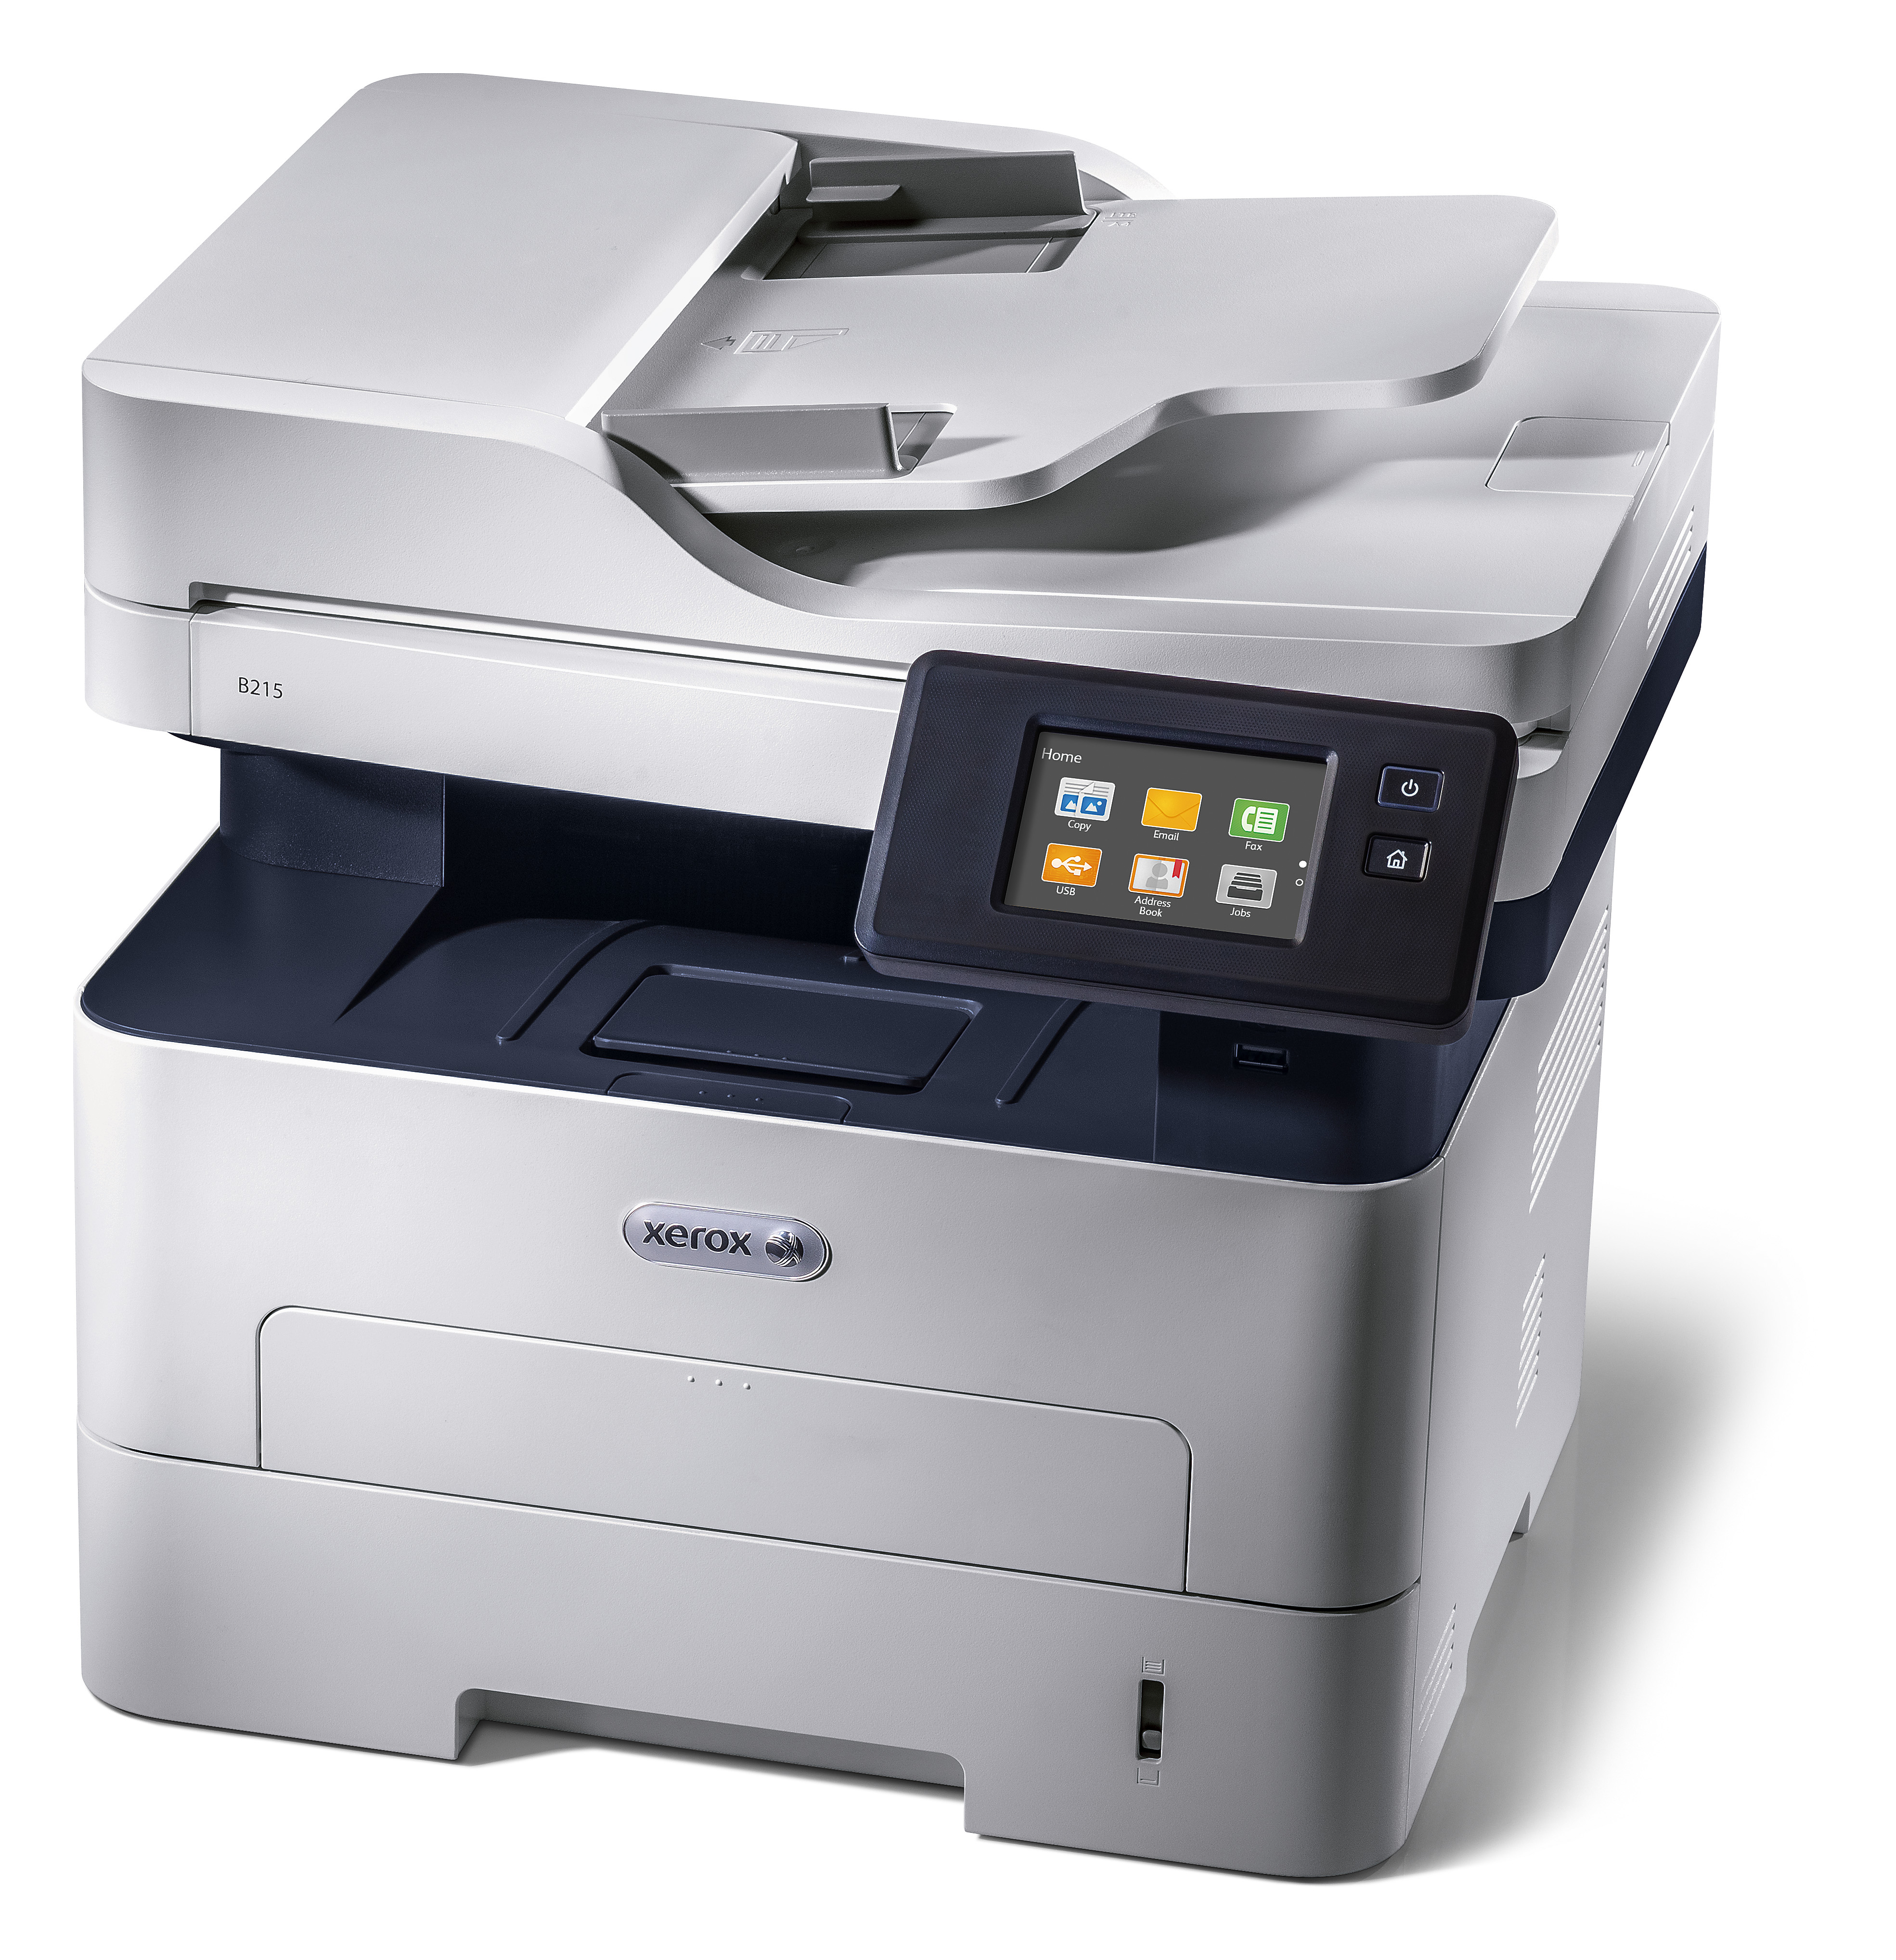 Xerox Compact Multifunction Printer with WiFi Direct and Mobile Printing